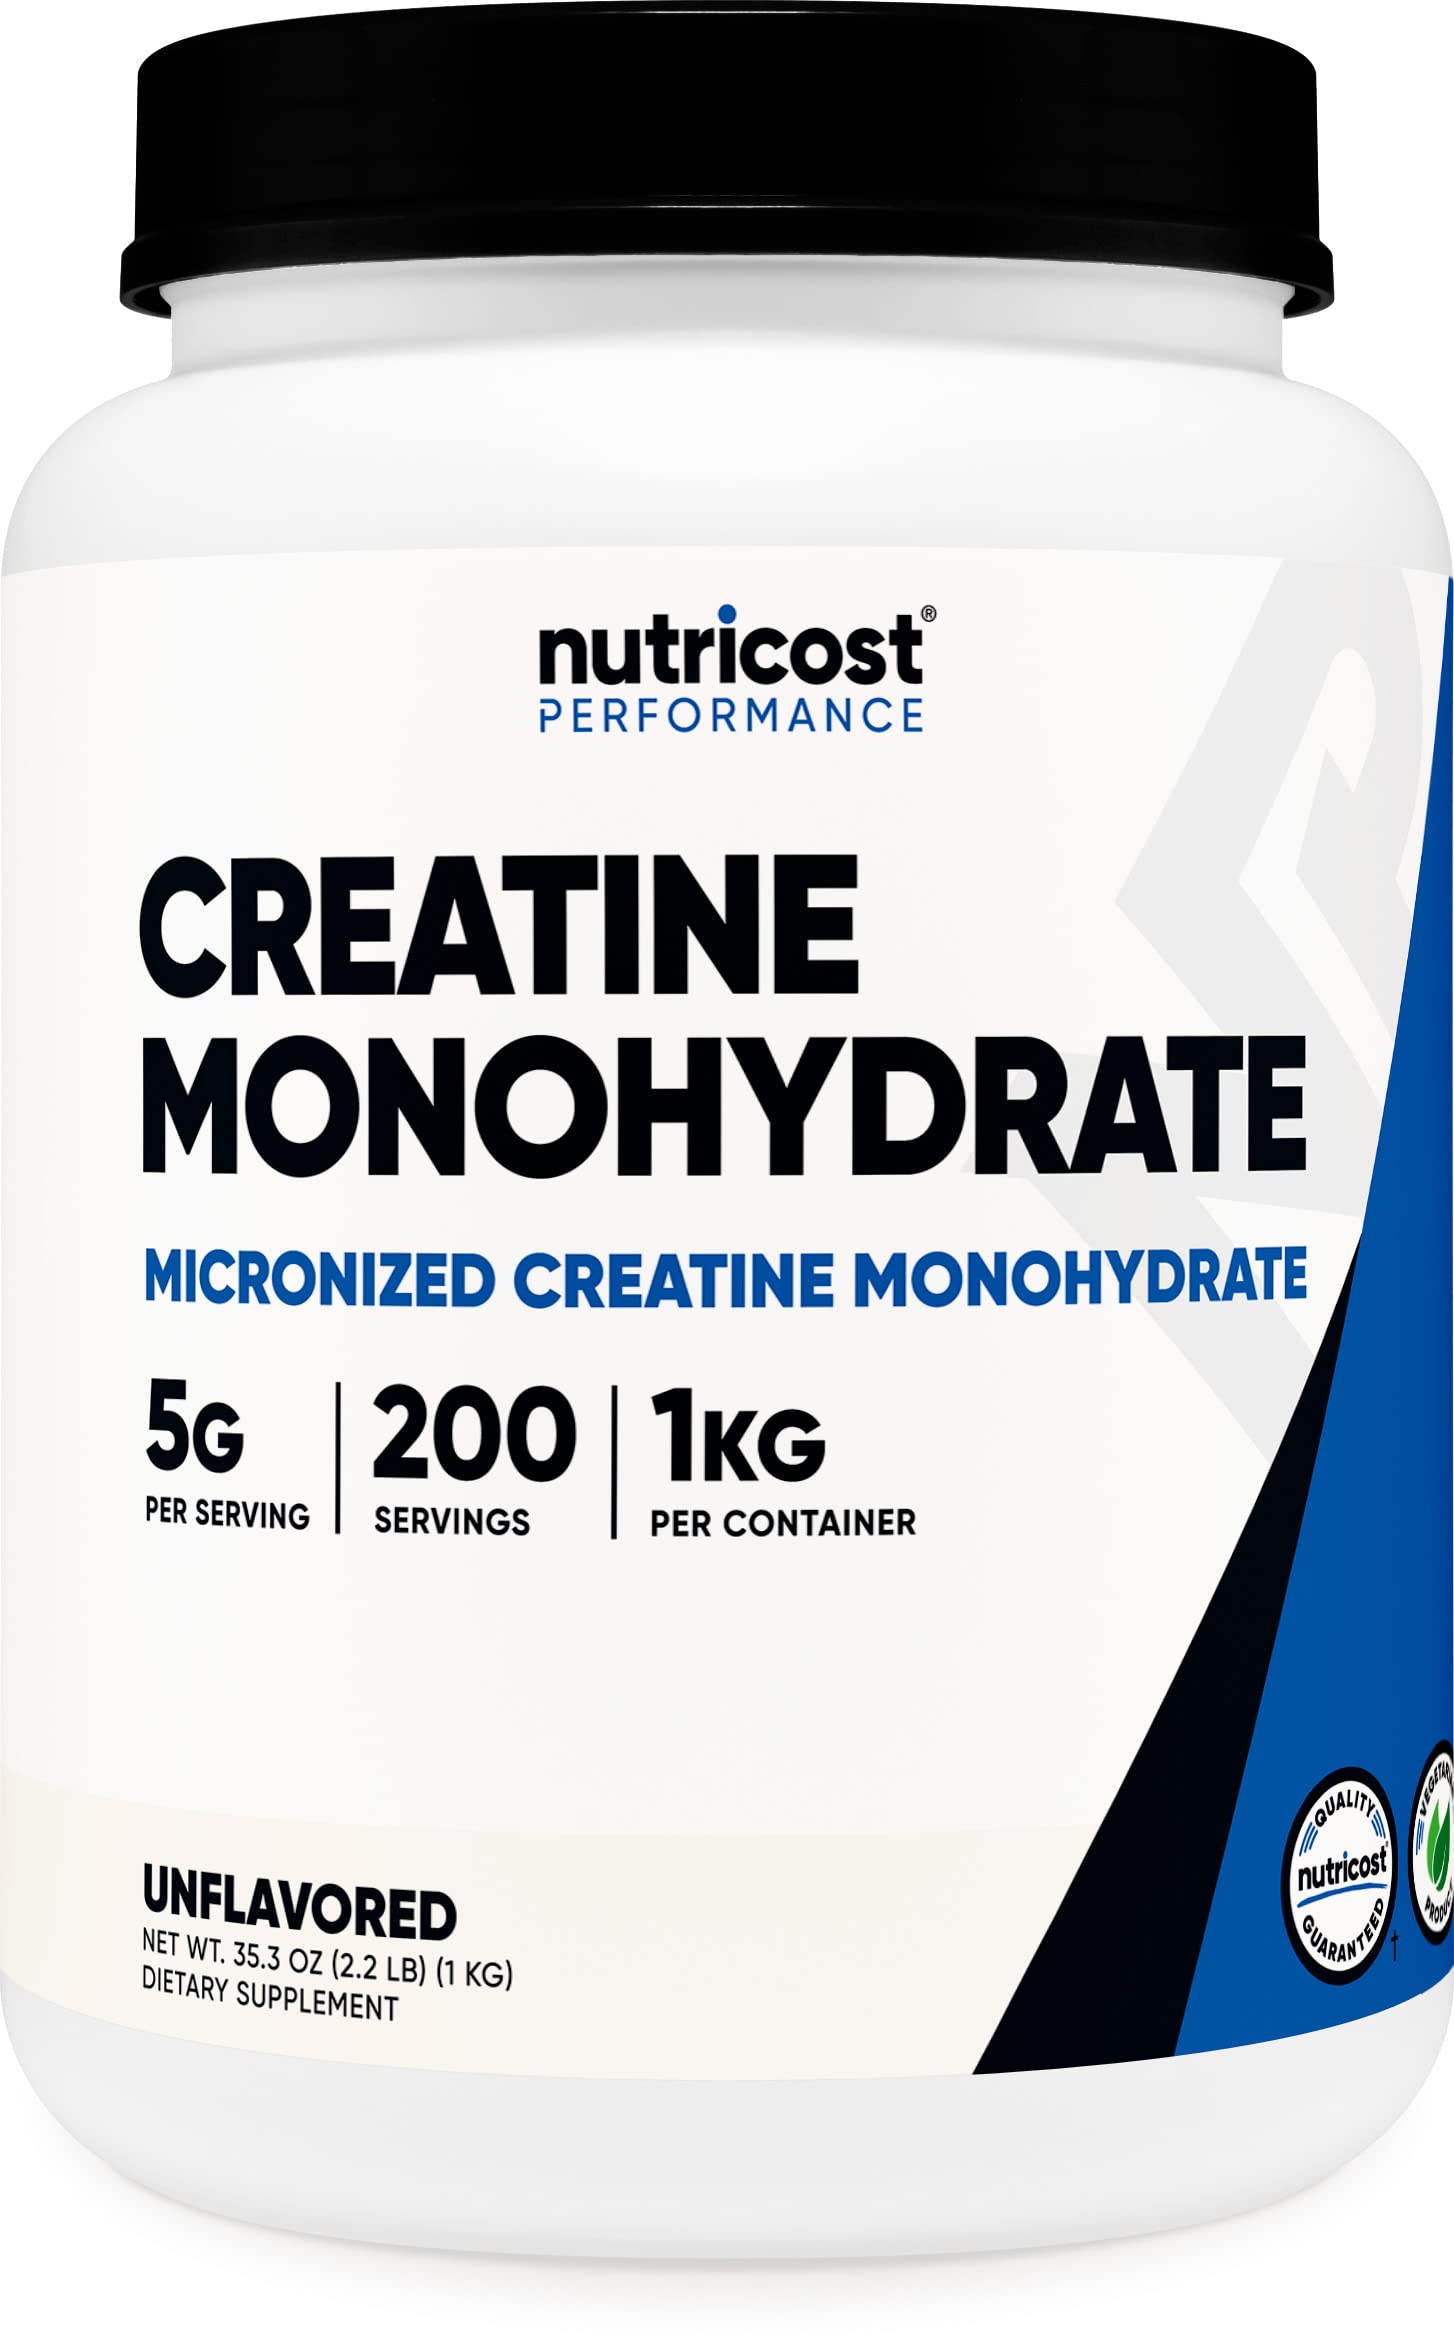 1kg (2.2-lb) Nutricost Creatine Monohydrate Micronized Powder (Unflavored) 1 for $31.46 - Amazon Prime Day